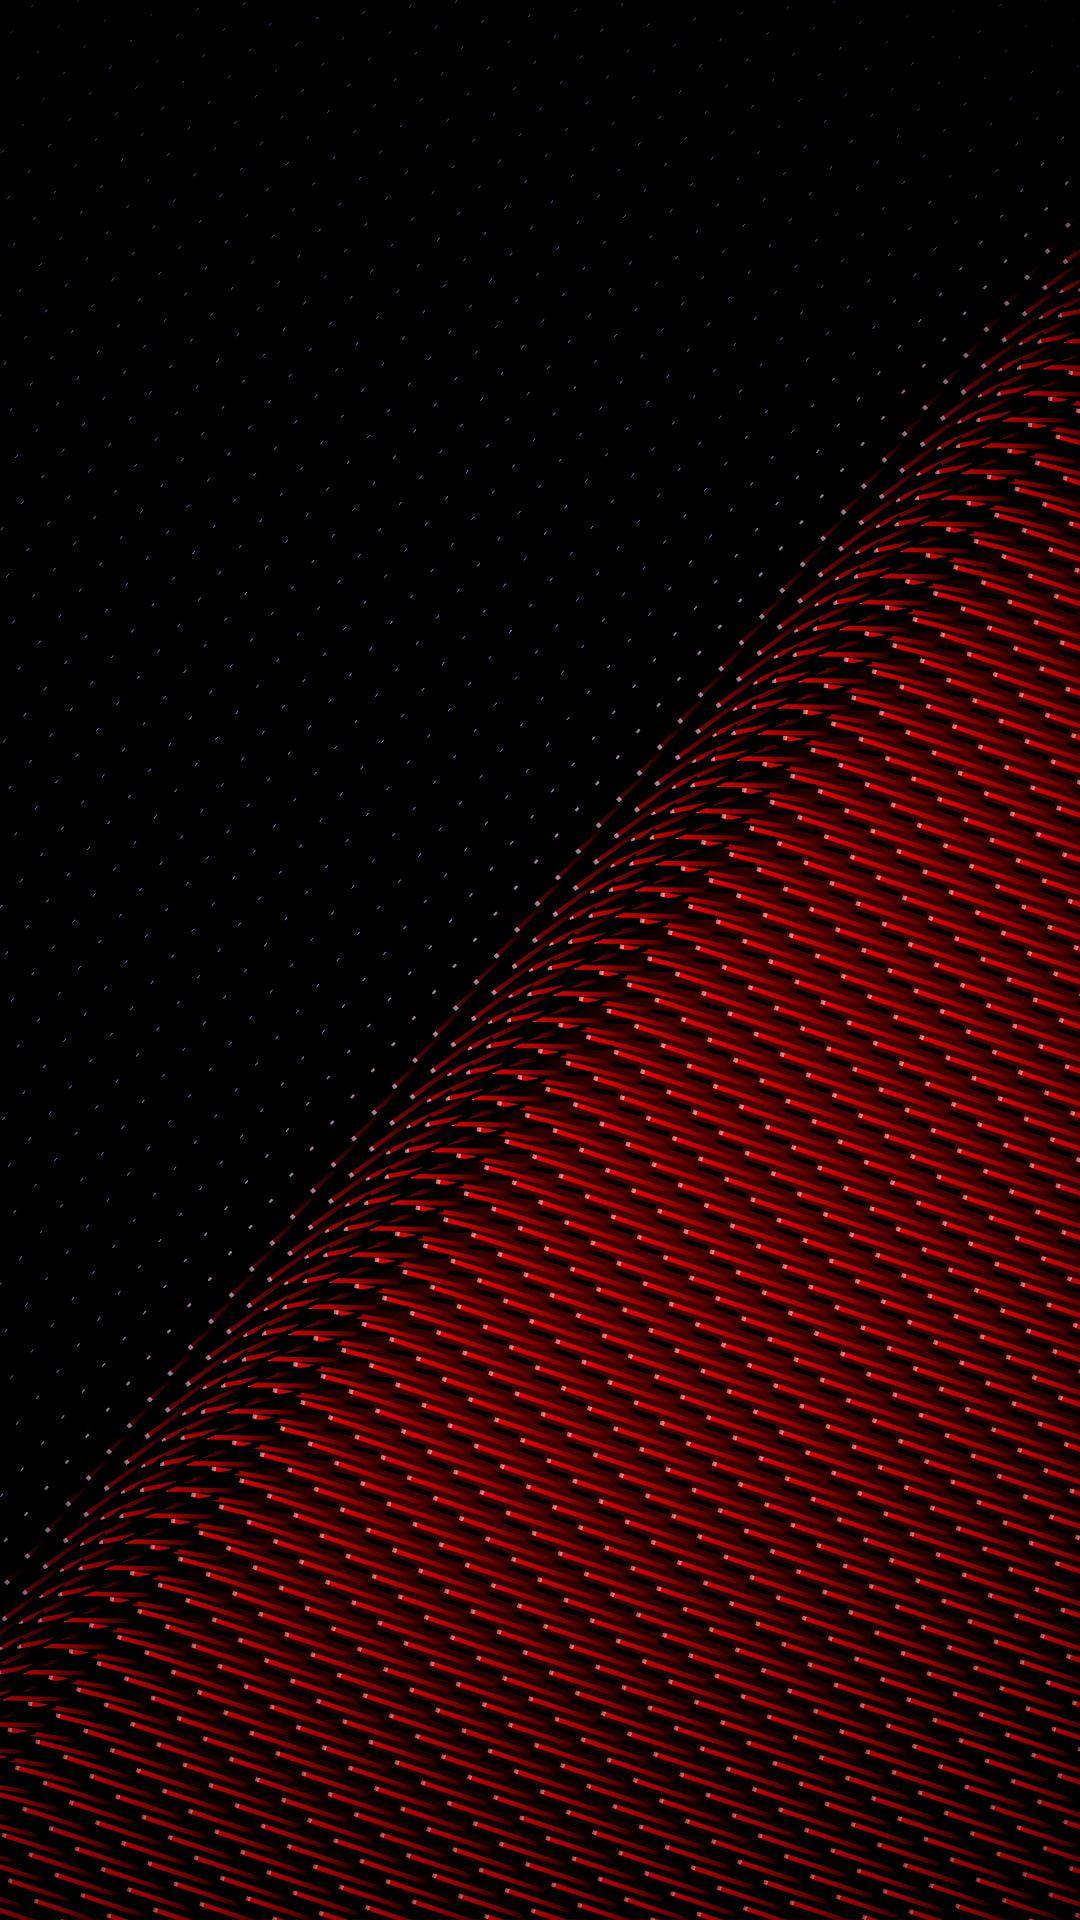 Red and black digital wallpaper, black background, abstract, amoled